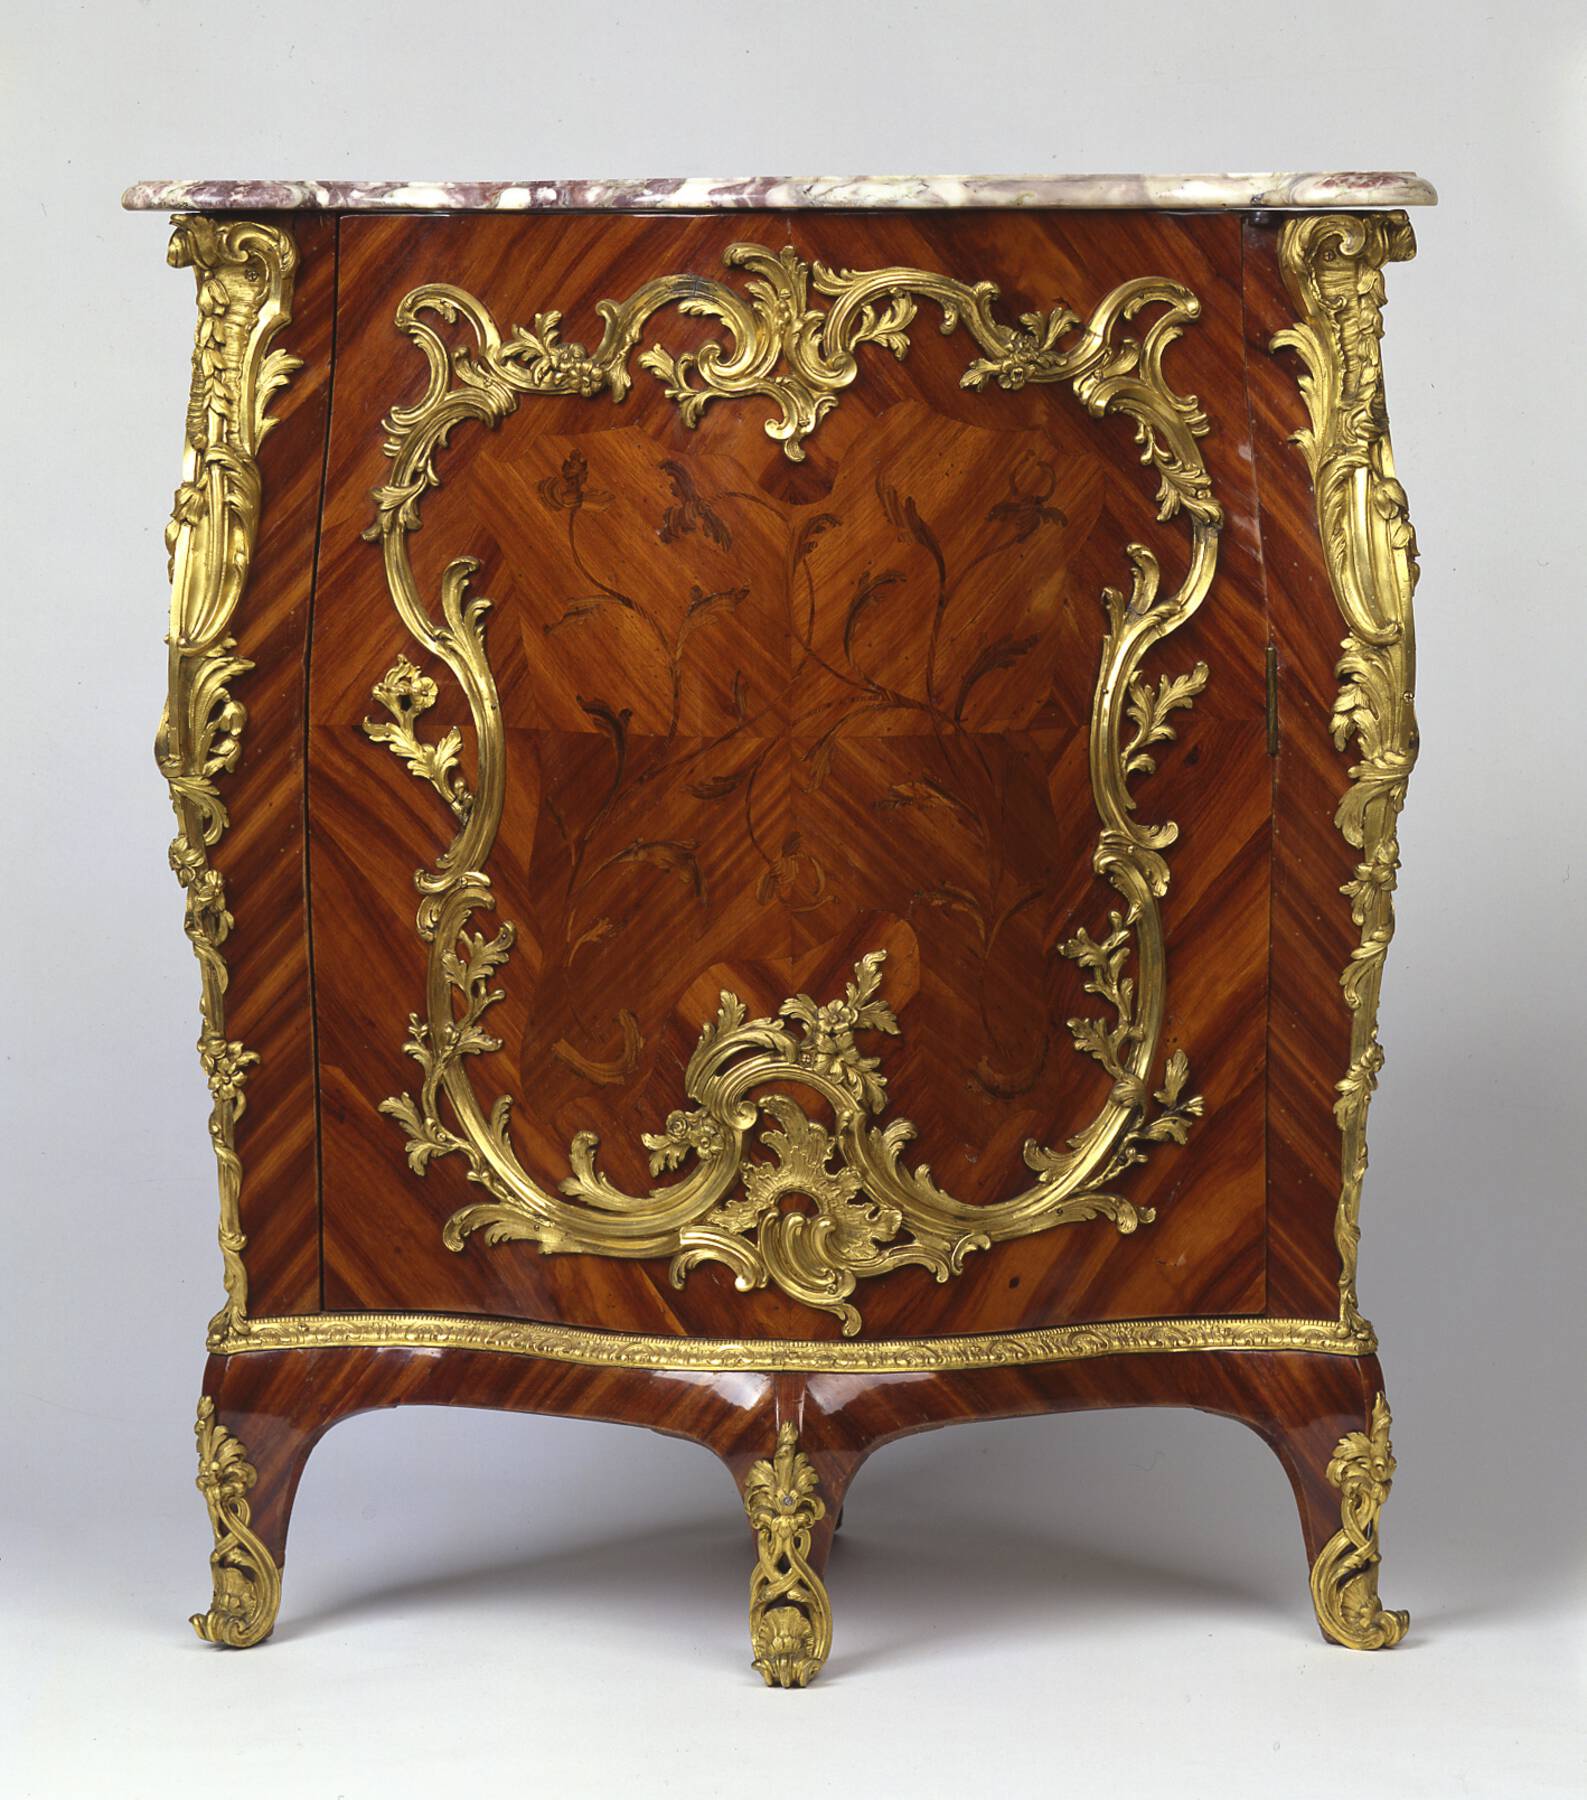 frontal view of an additional corner cabinet, decorated with floral veneer, rather than lacquer designs, and curvilinear gilt bronze mounts